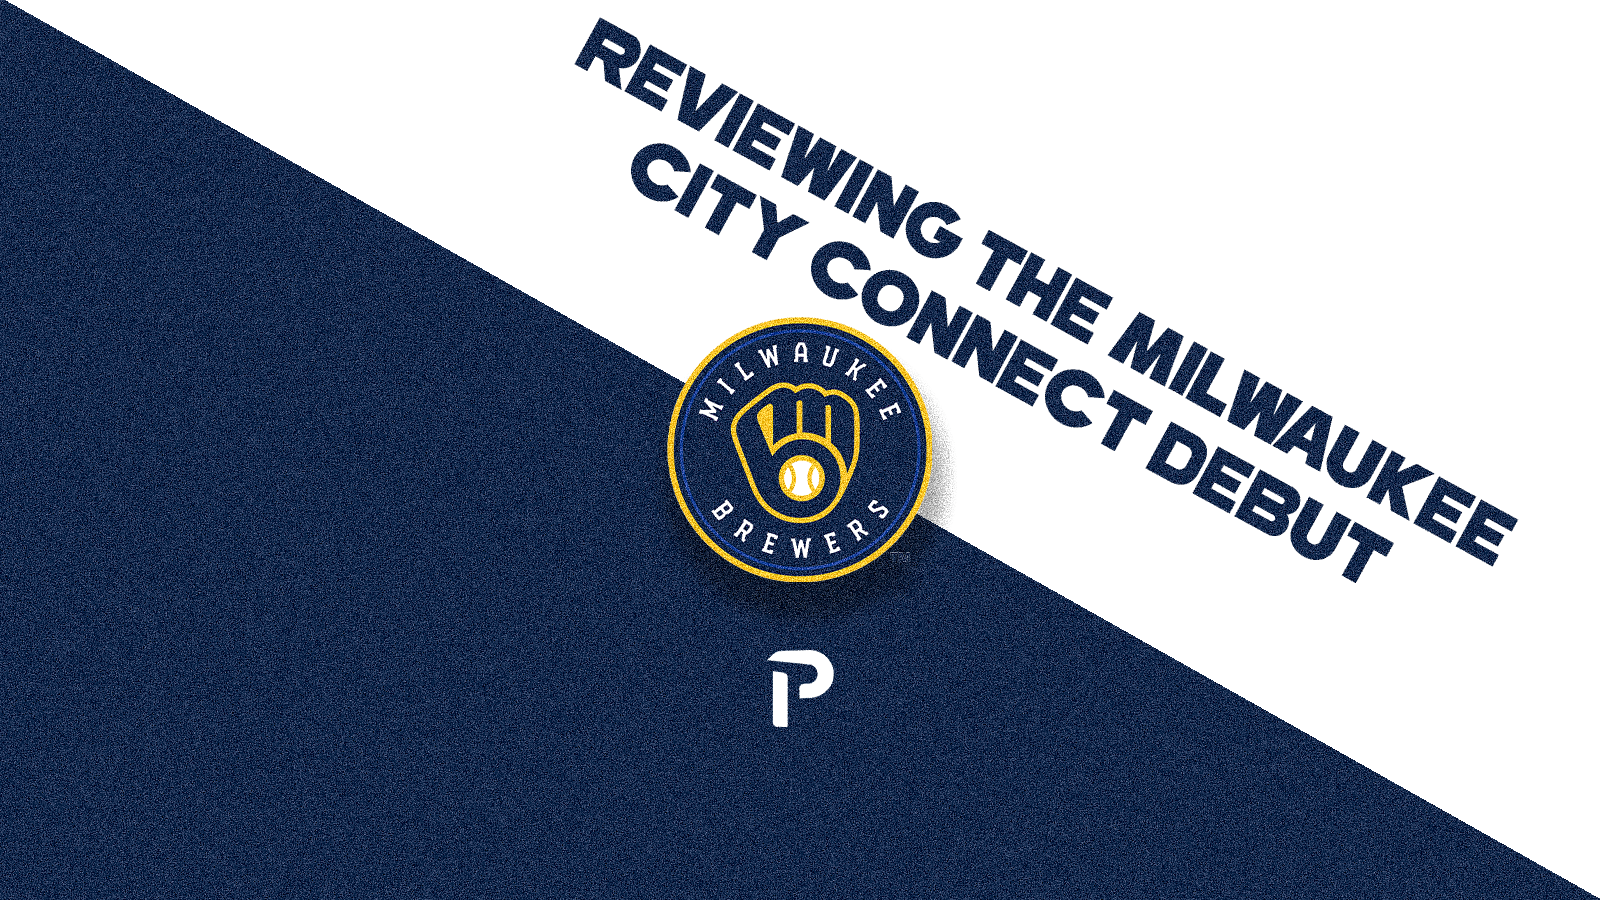 Discussing the Milwaukee City Connect Reveal